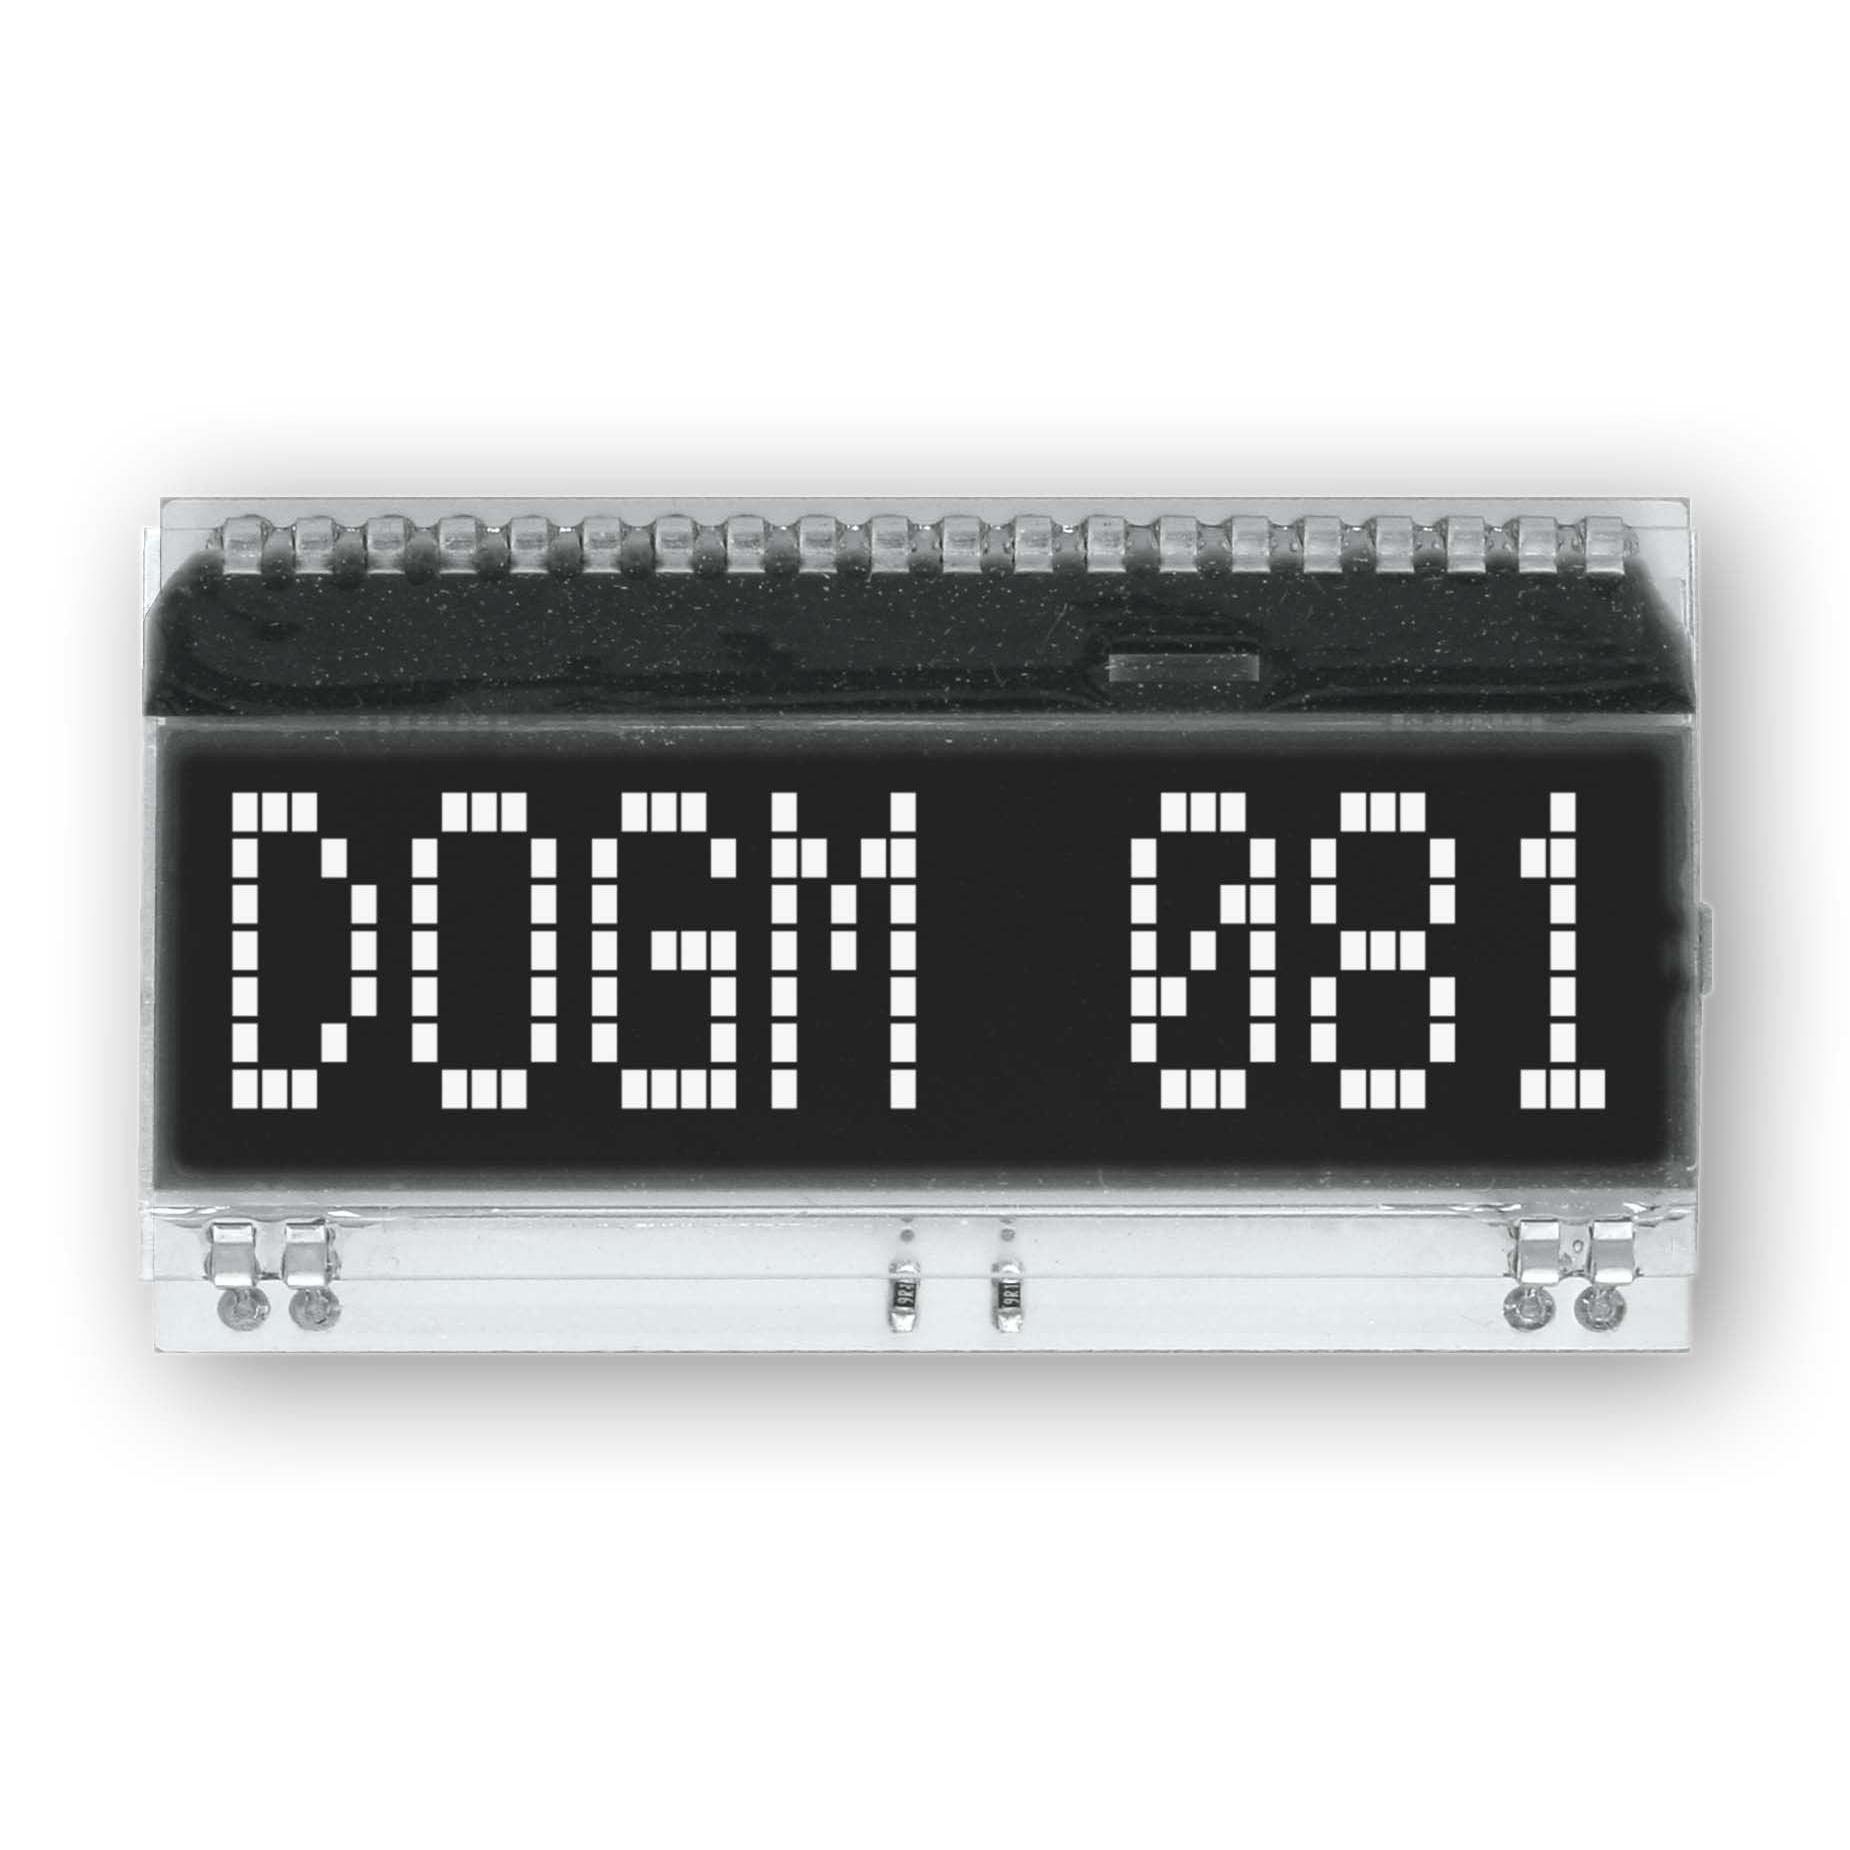 Display Visions EA DOGM081S-A